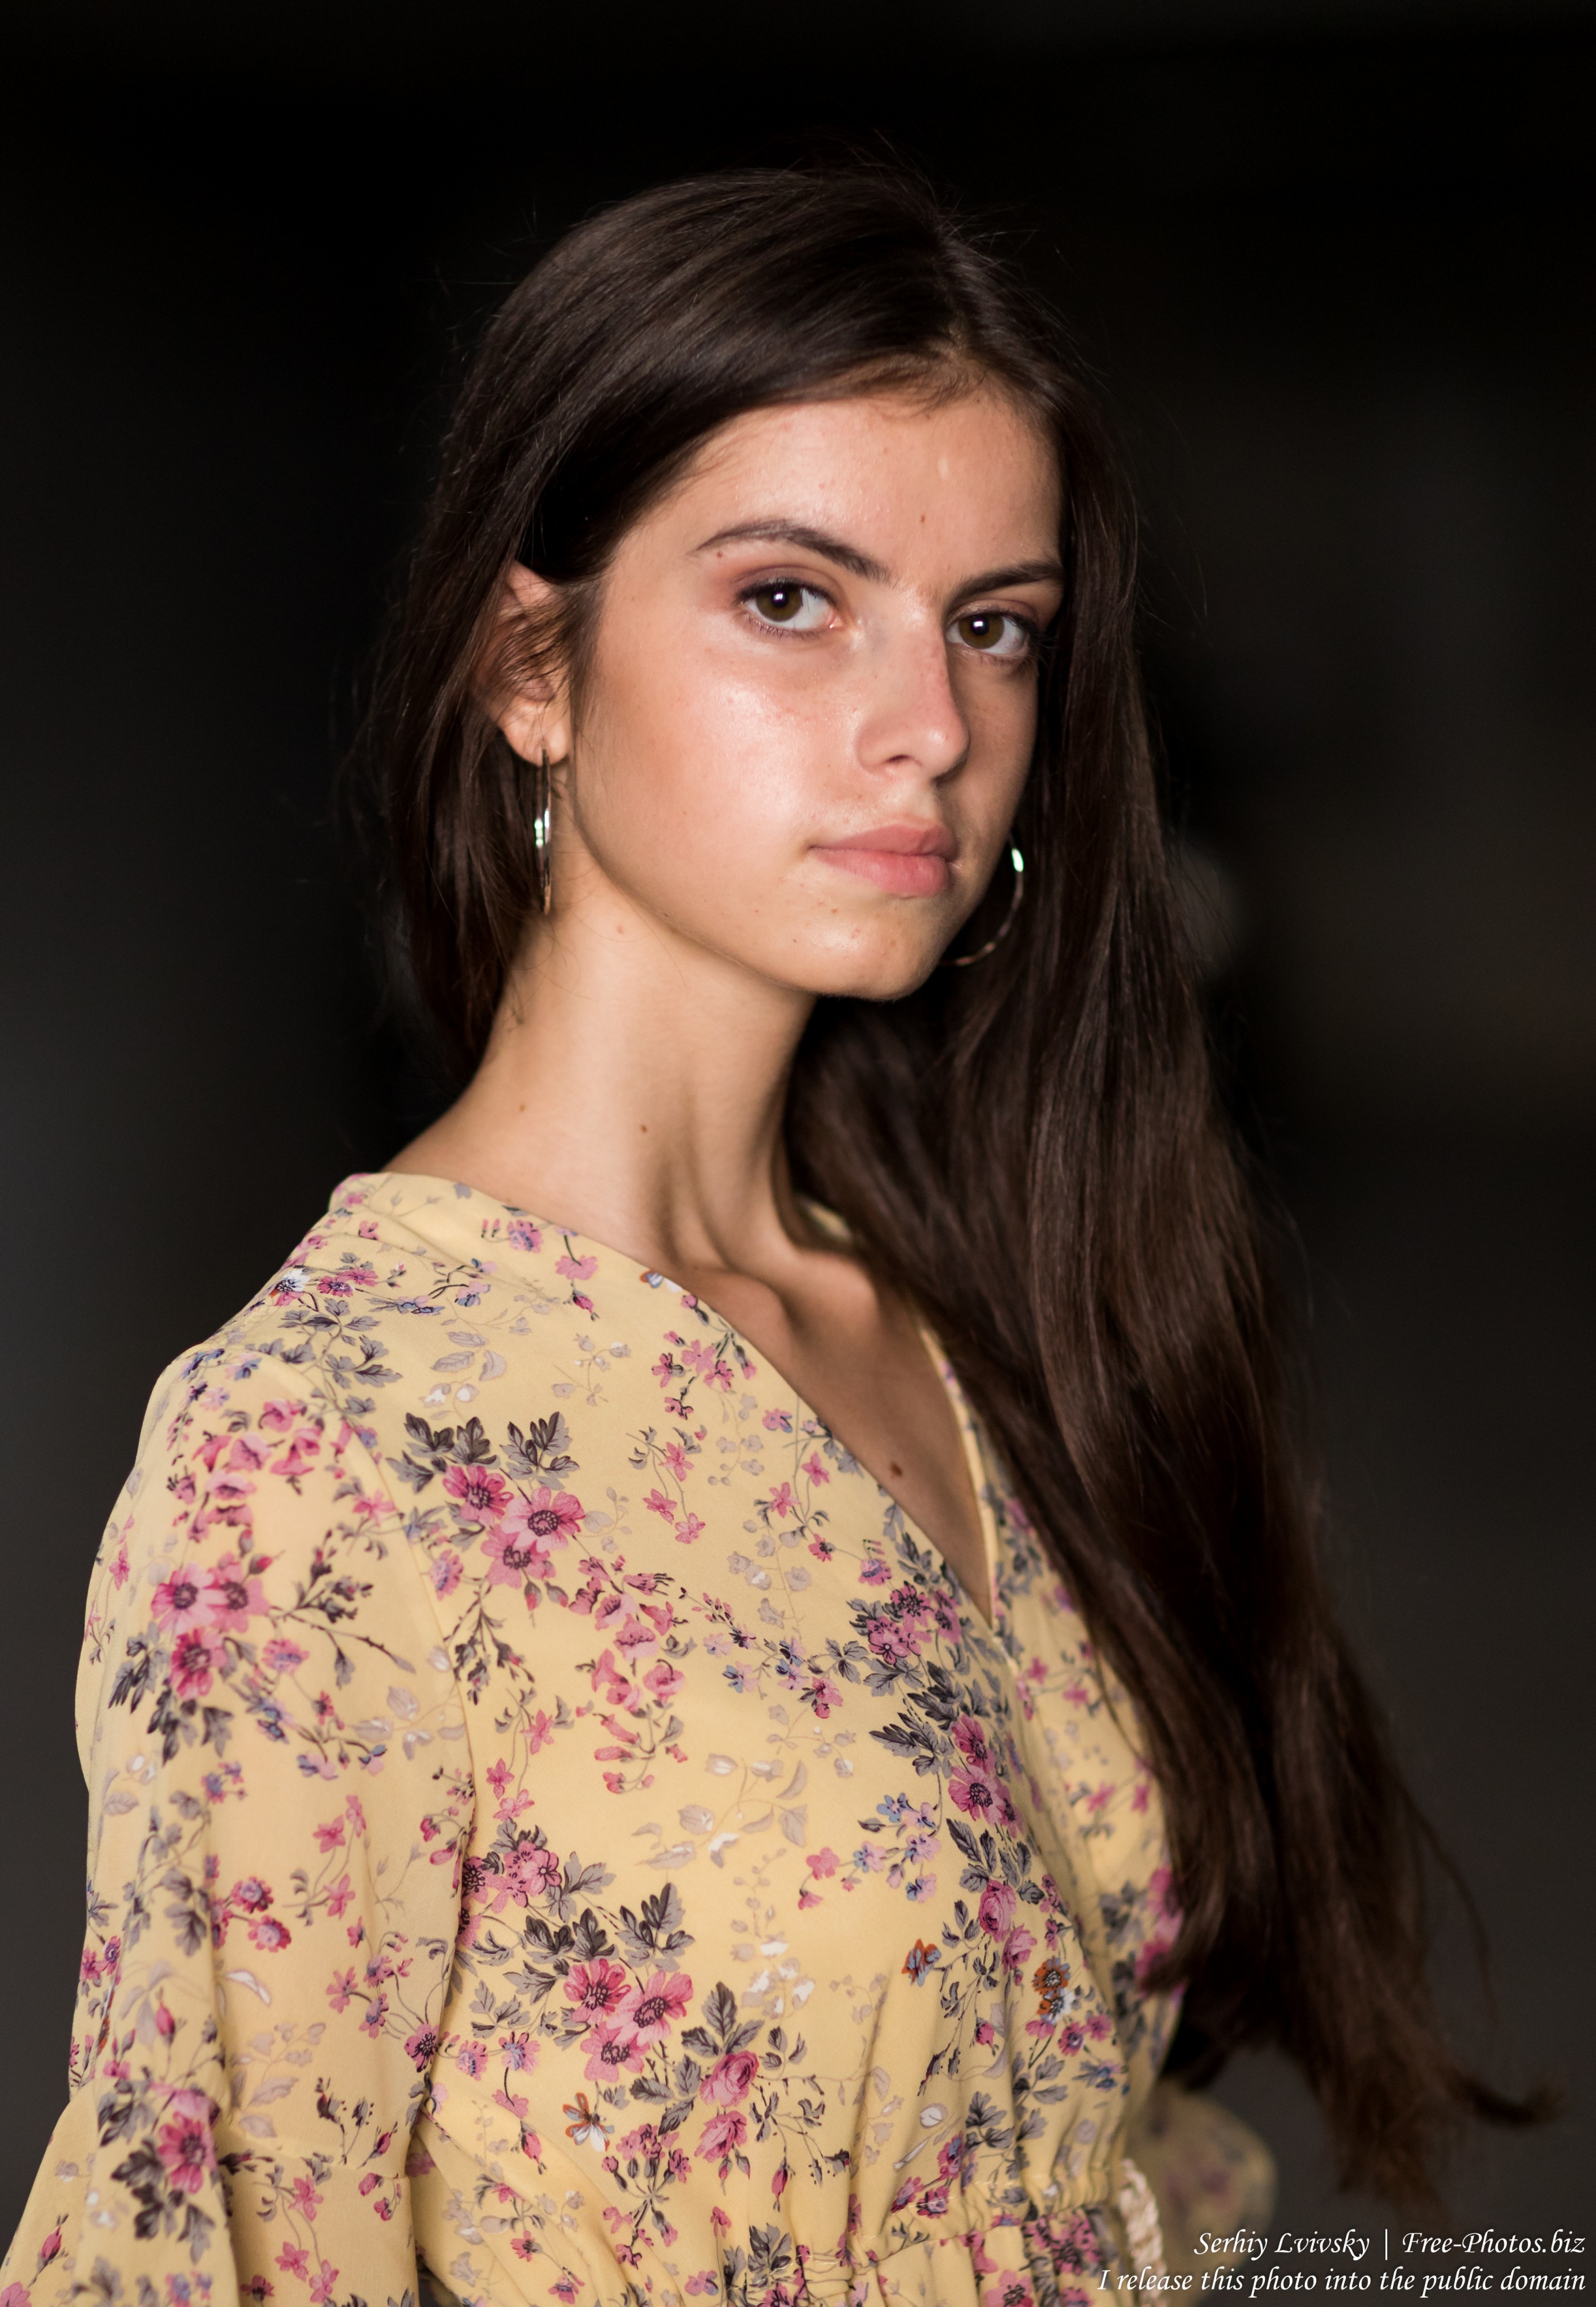 Photo Of Christina A 16 Year Old Brunette Girl Photographed In July 2019 By Serhiy Lvivsky